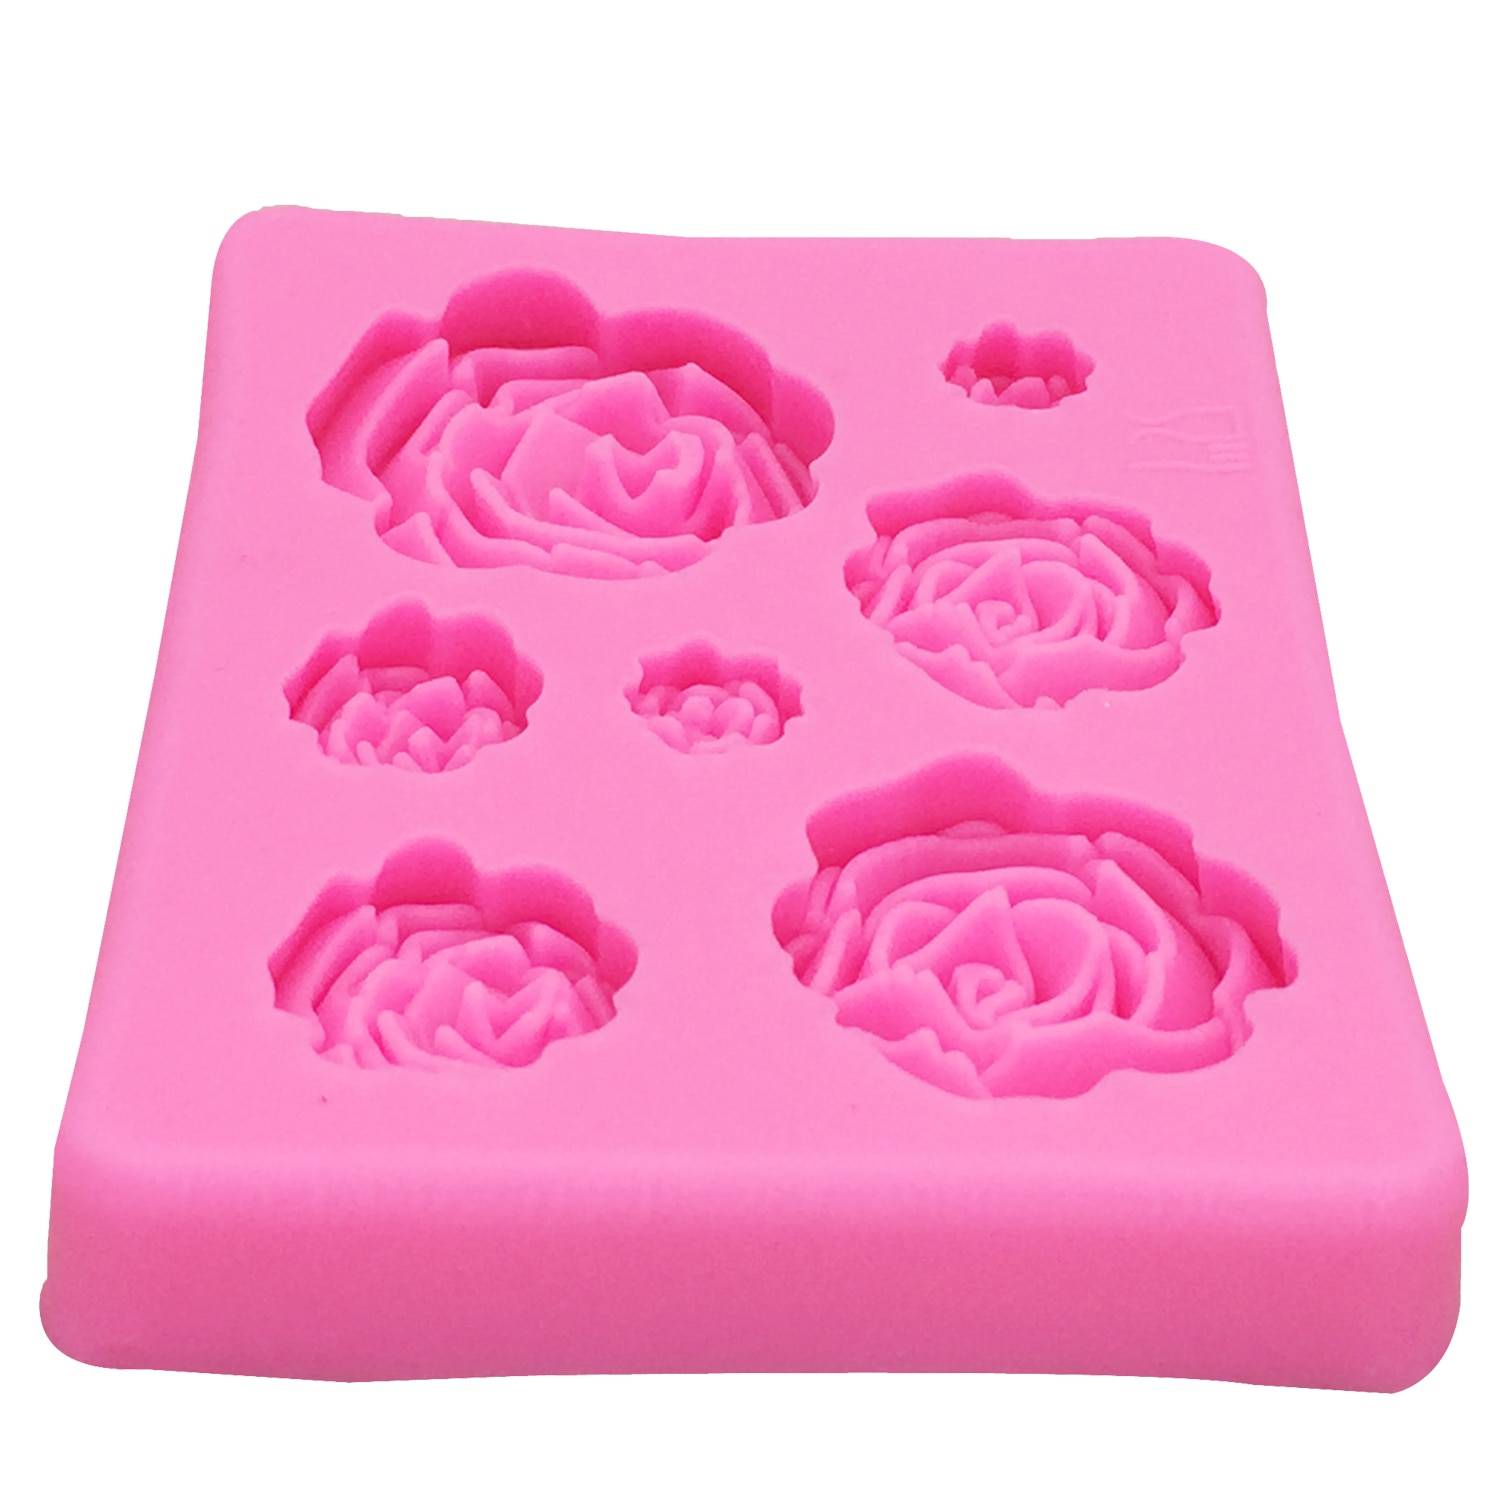 Rose Flowers Shaped Silicone Cake Mold Bakeware Kitchen Accessories